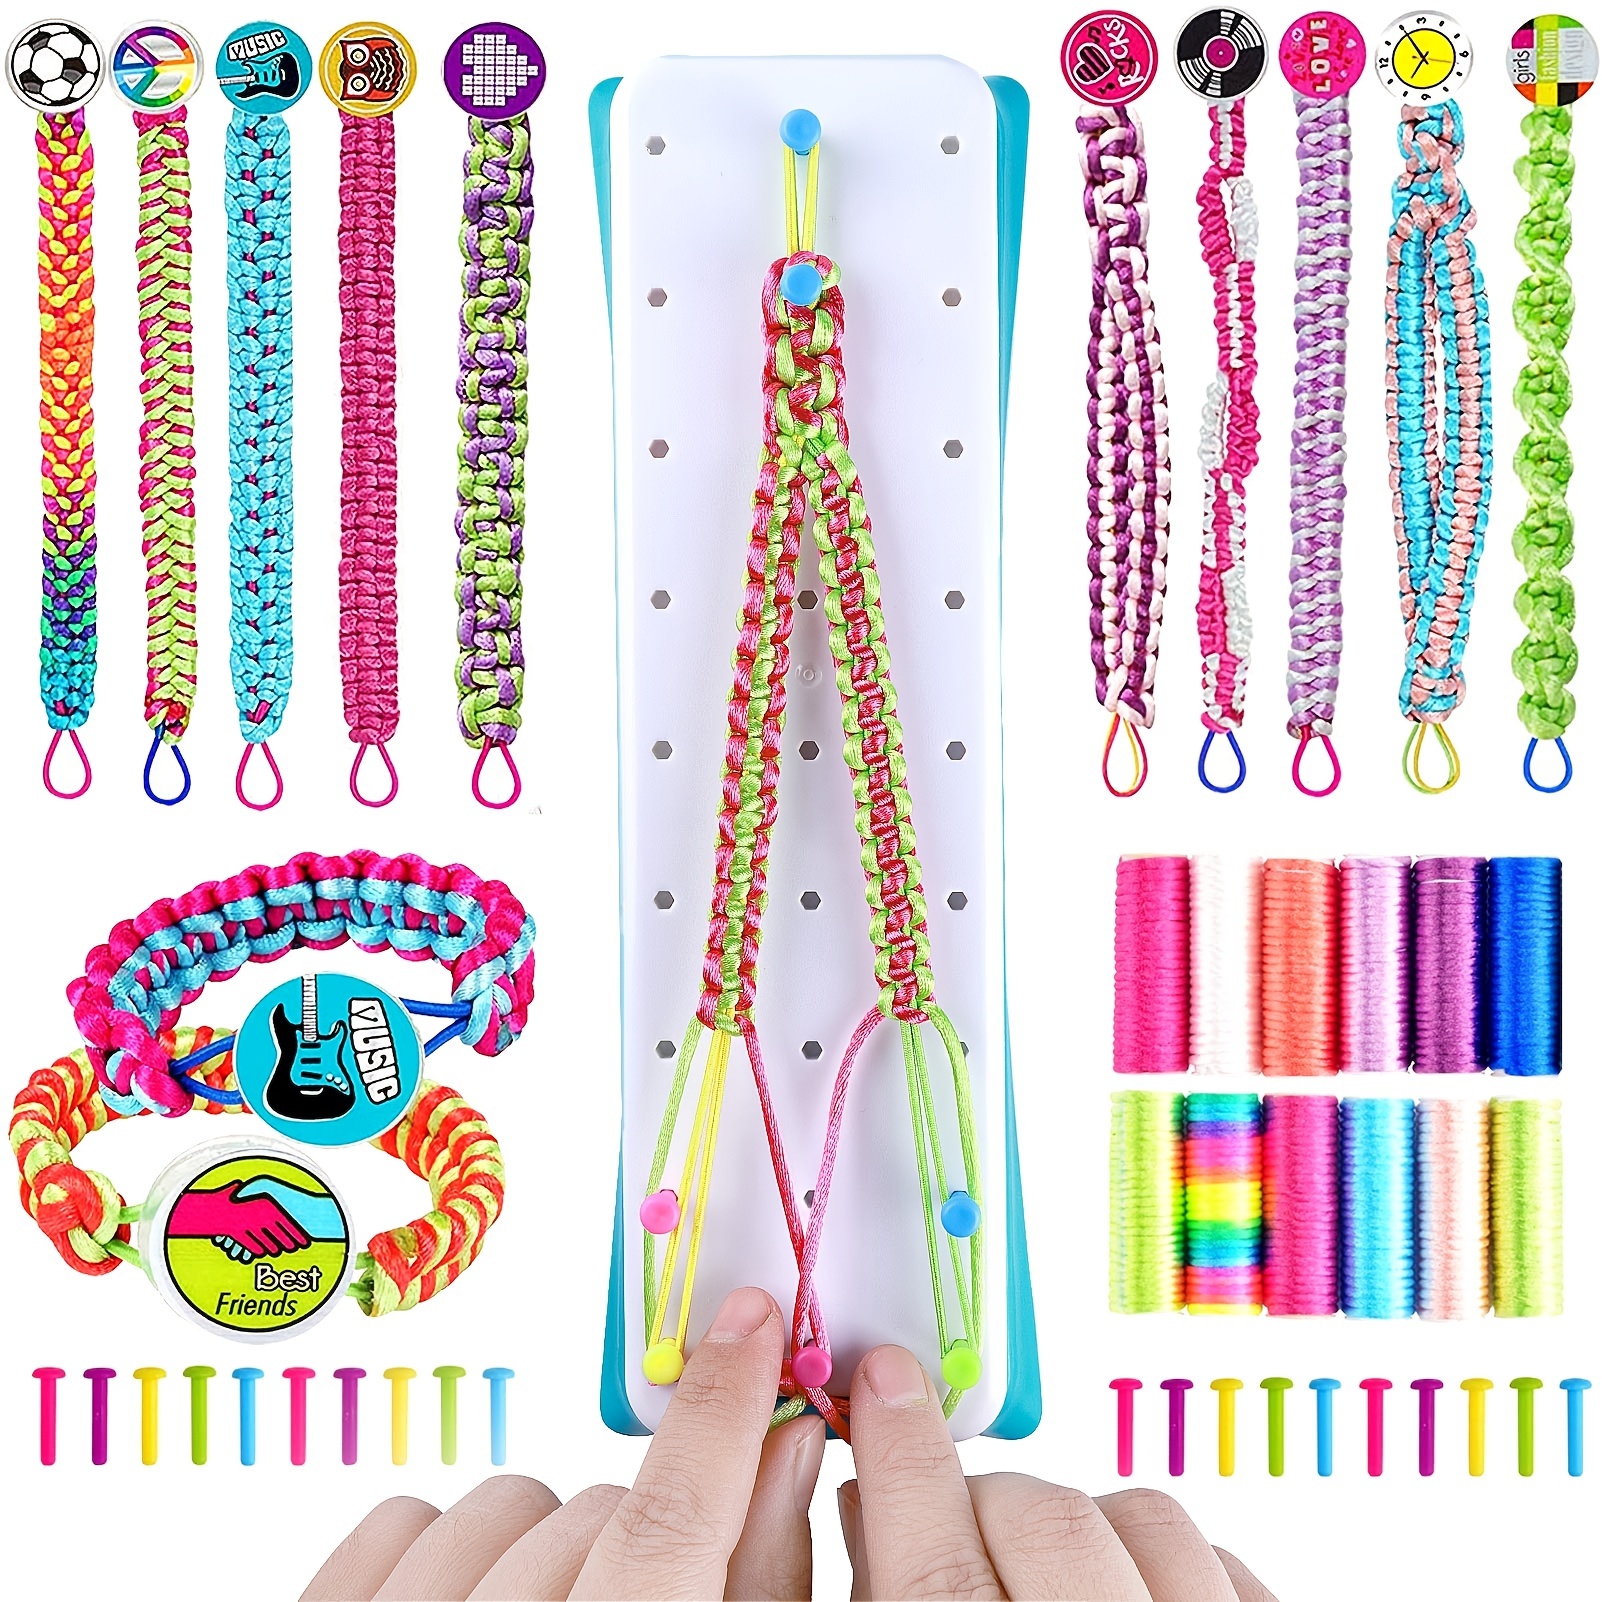 Mactoou 292PCS Friendship Bracelet Making Kit, Girls Gifts Ages 7 8 9 10 11  12 Year Old, Arts and Crafts for Kids Ages 8-12, DIY Jewellery Making Kits